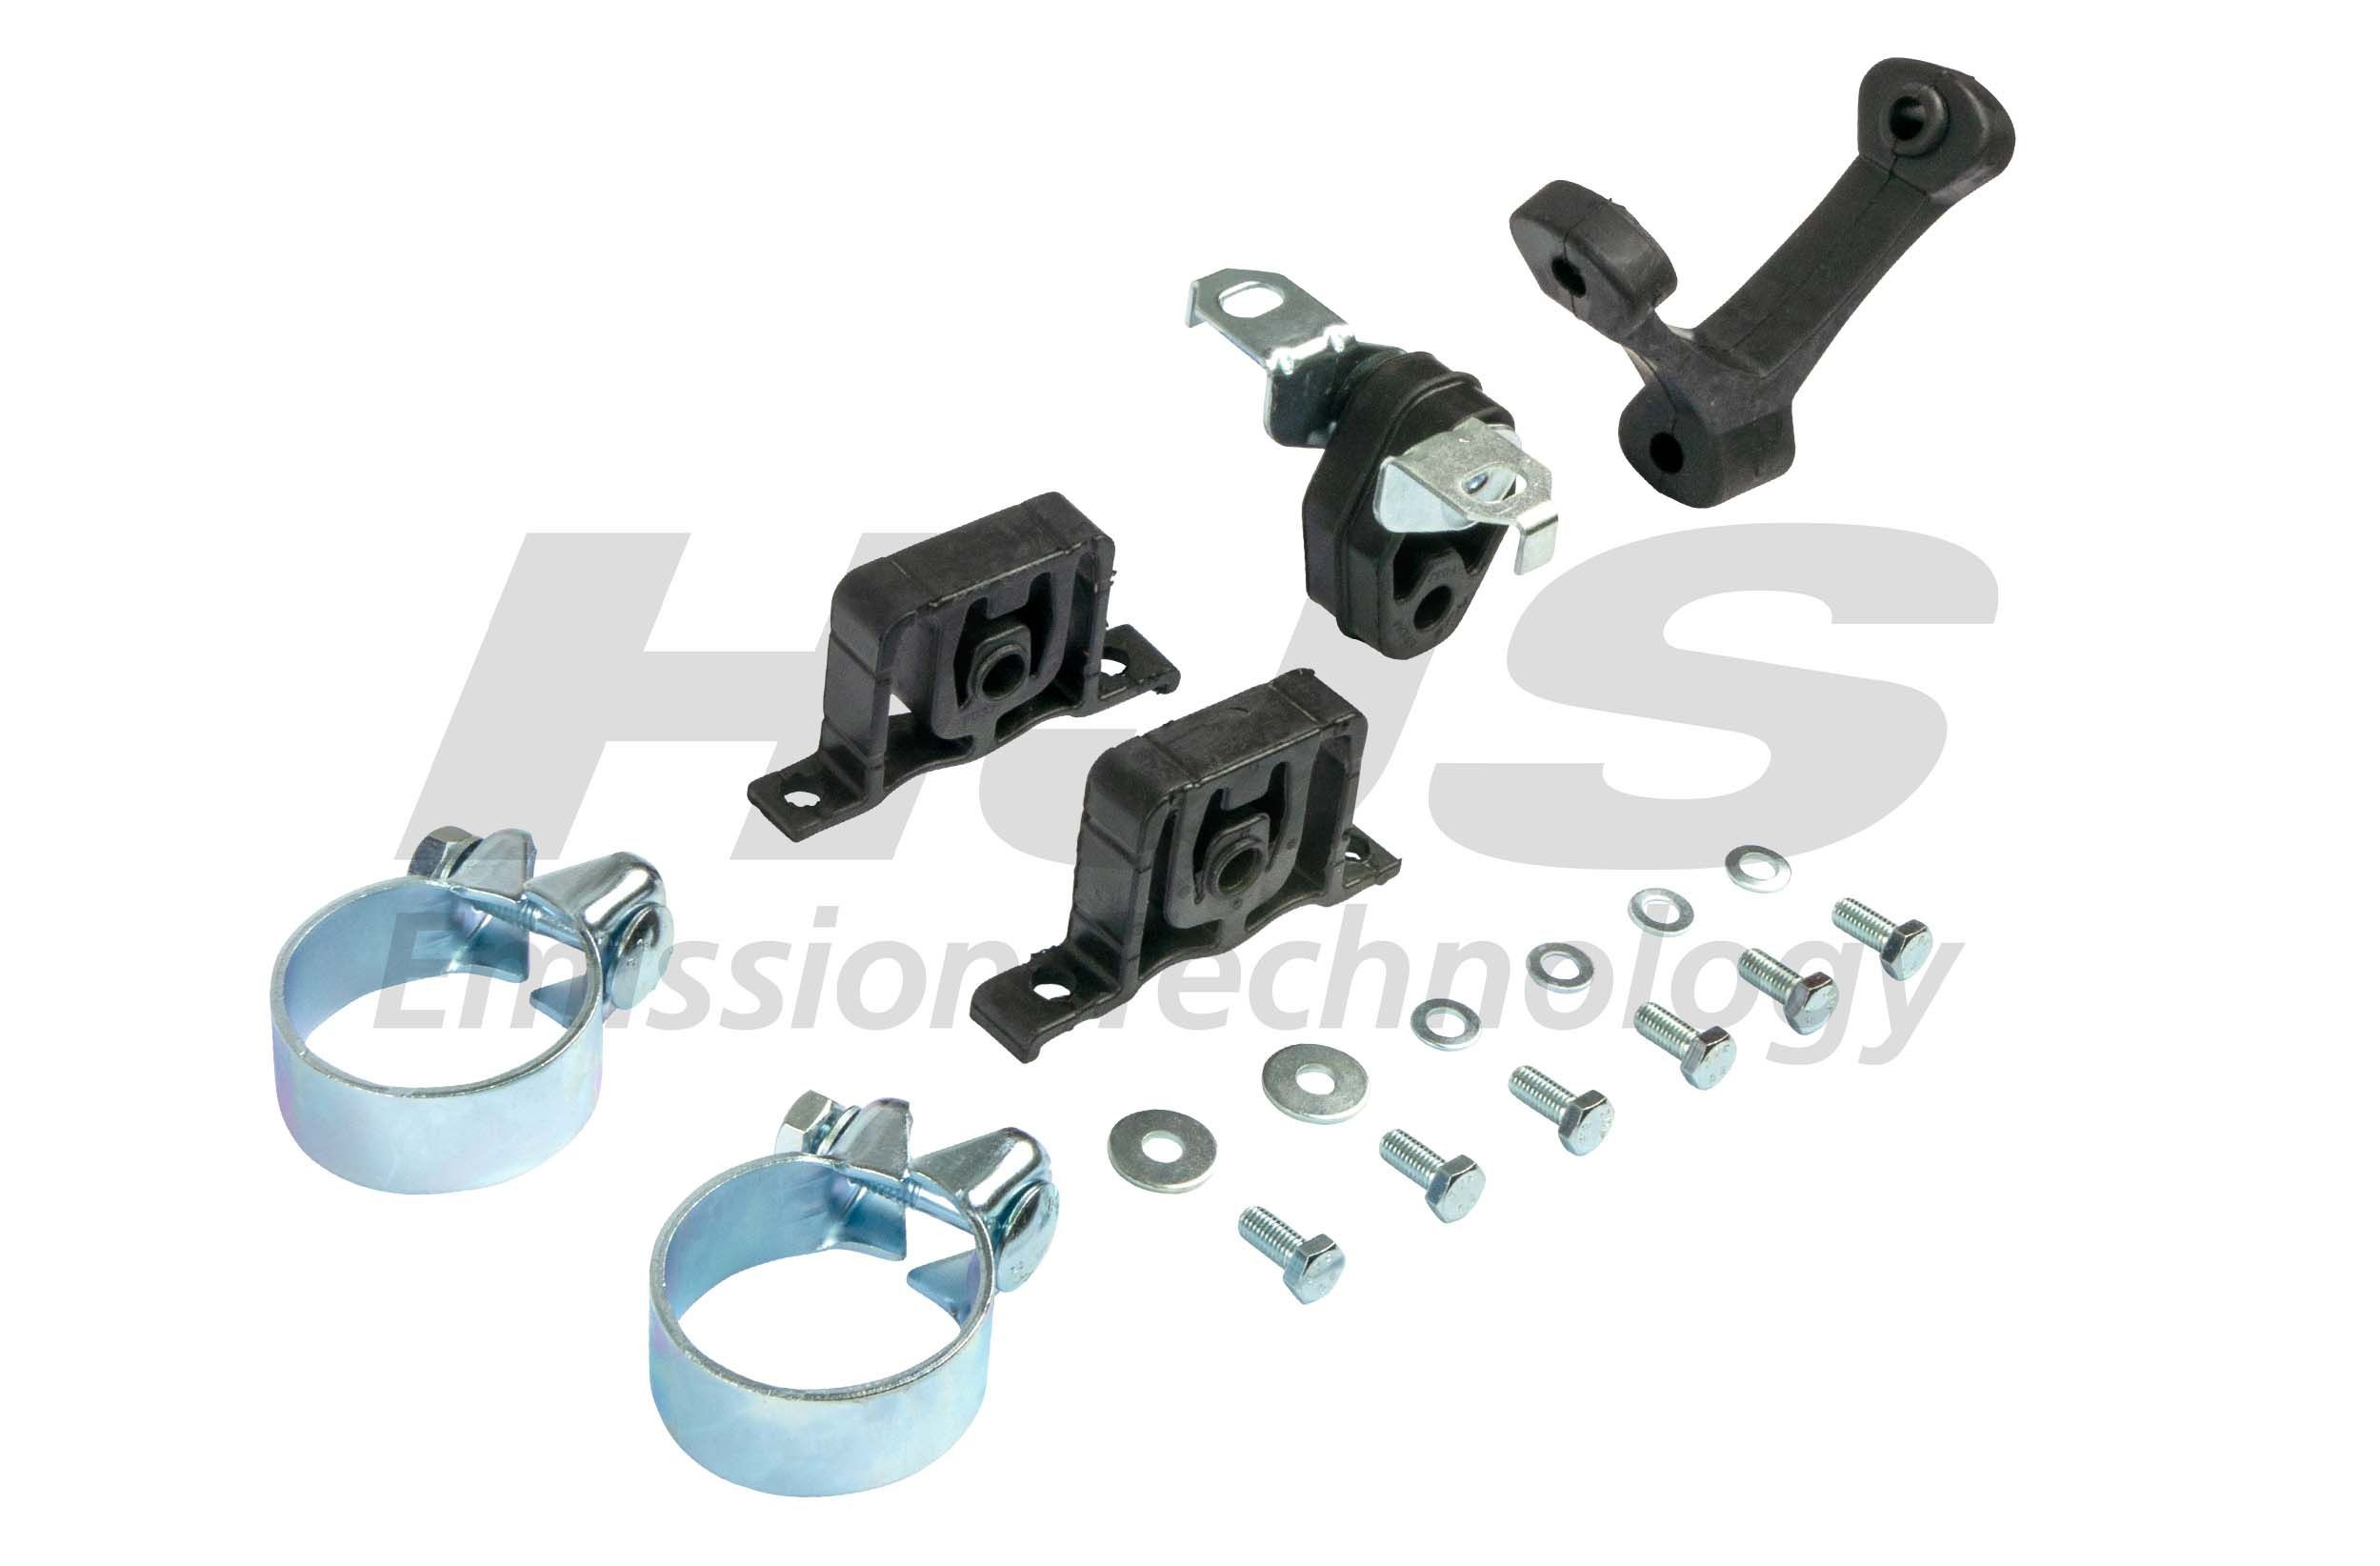 Exhaust mounting kit HJS 82 11 1599 Reviews